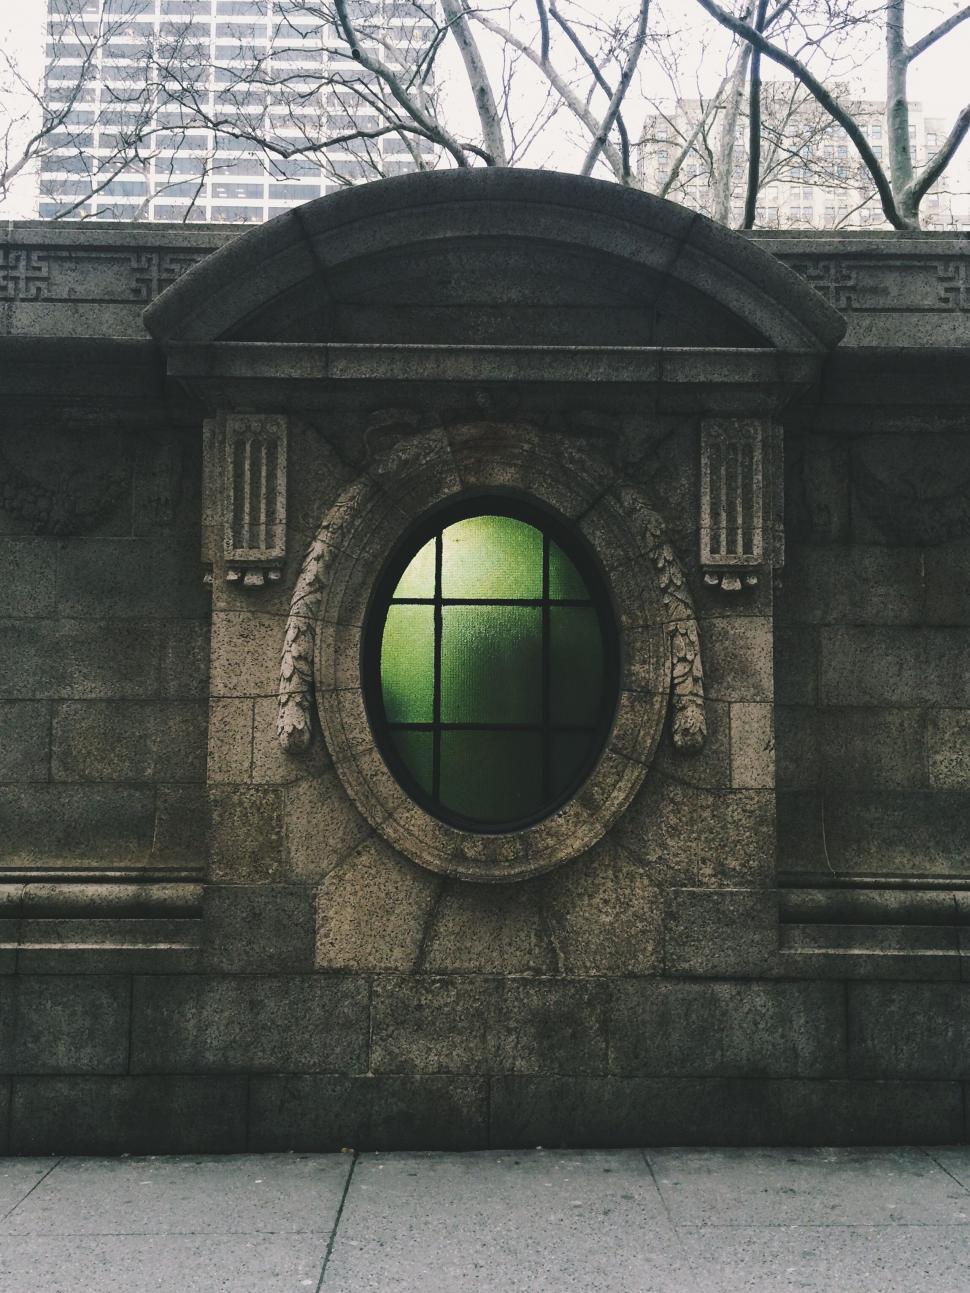 Free Image of Stone Building With Circular Window 